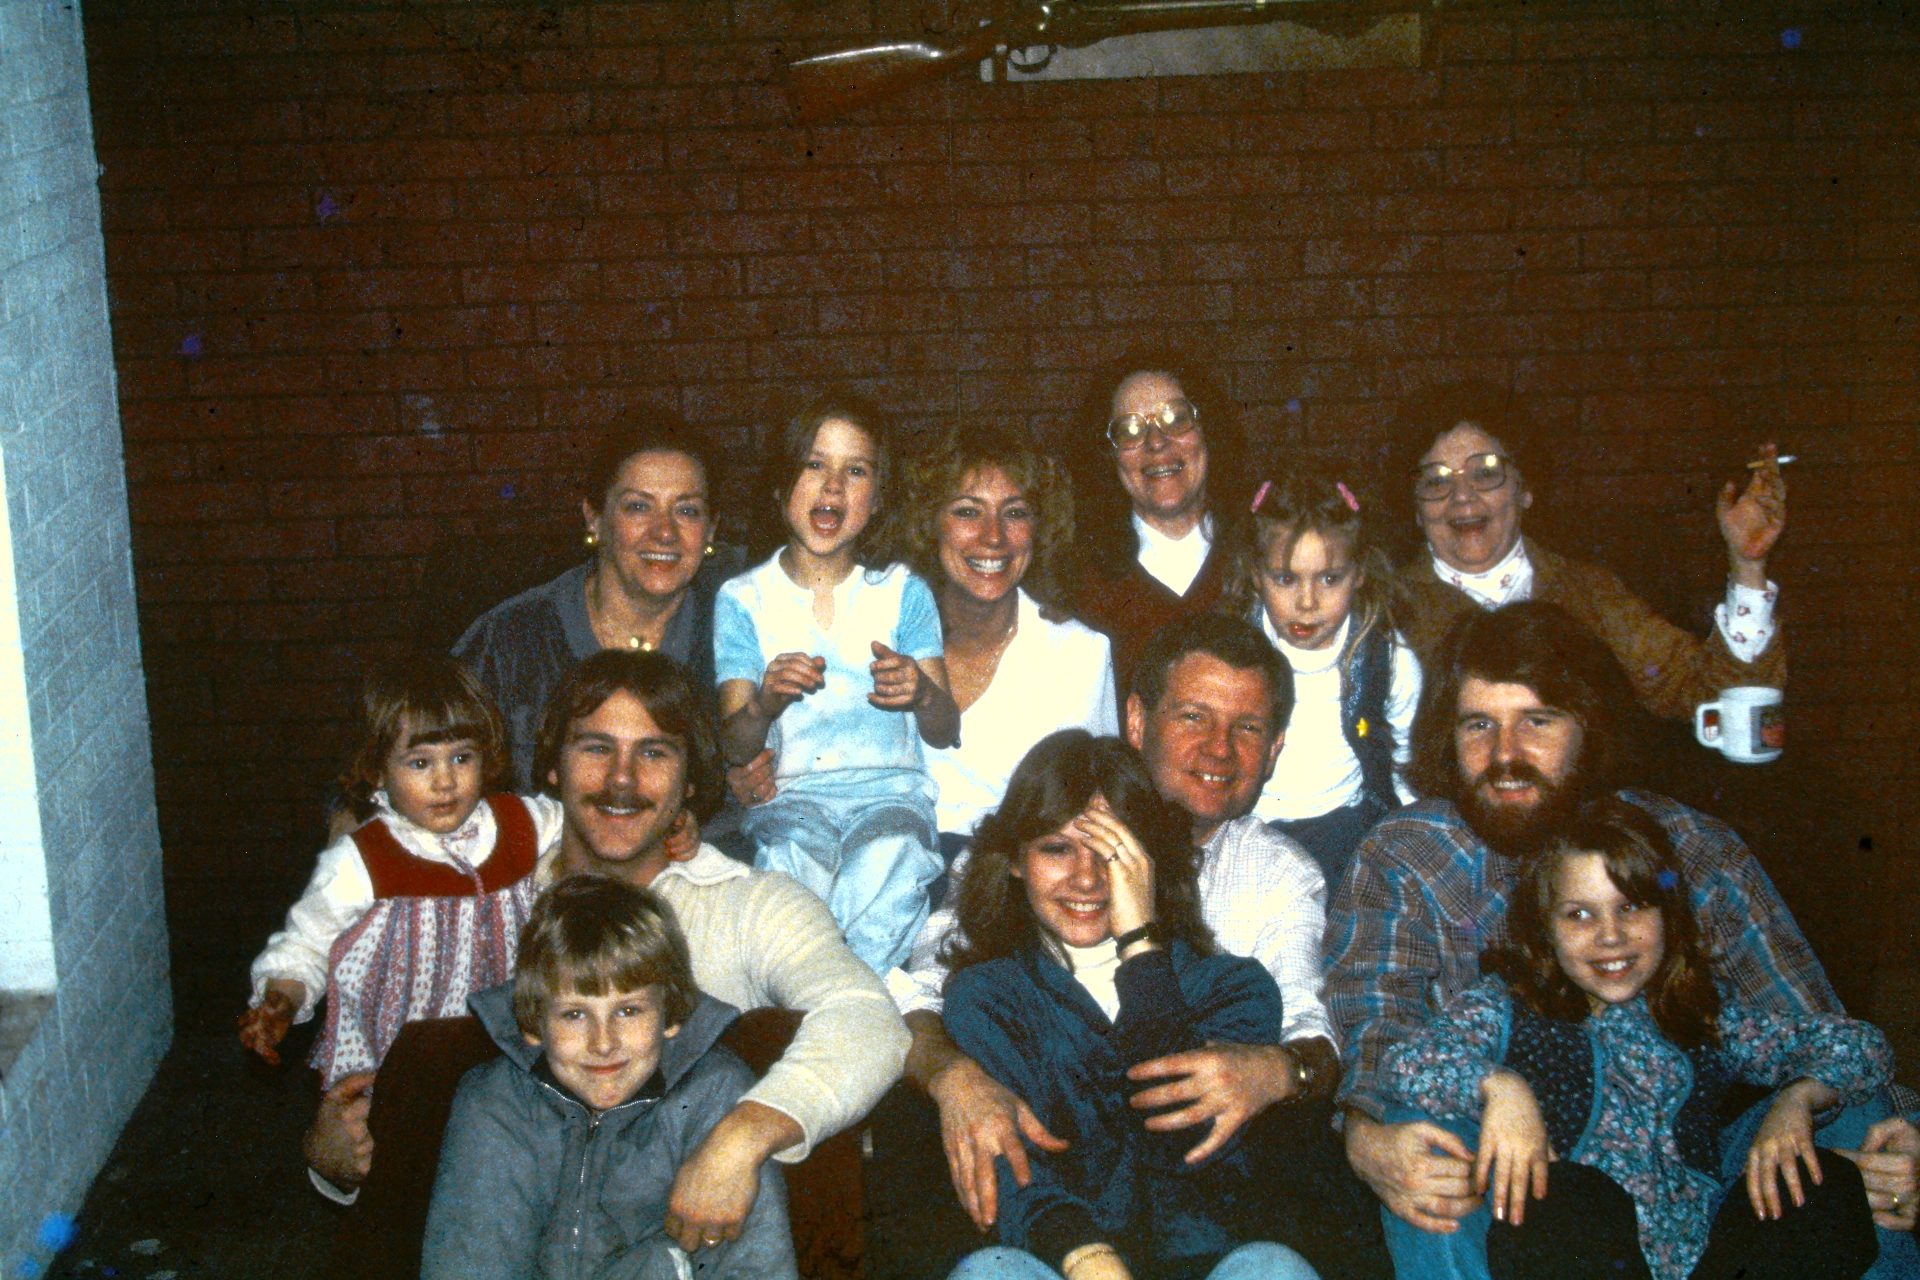 Paul (pictured second row, middle) with the rest of the immediate Provance family circa 1980.